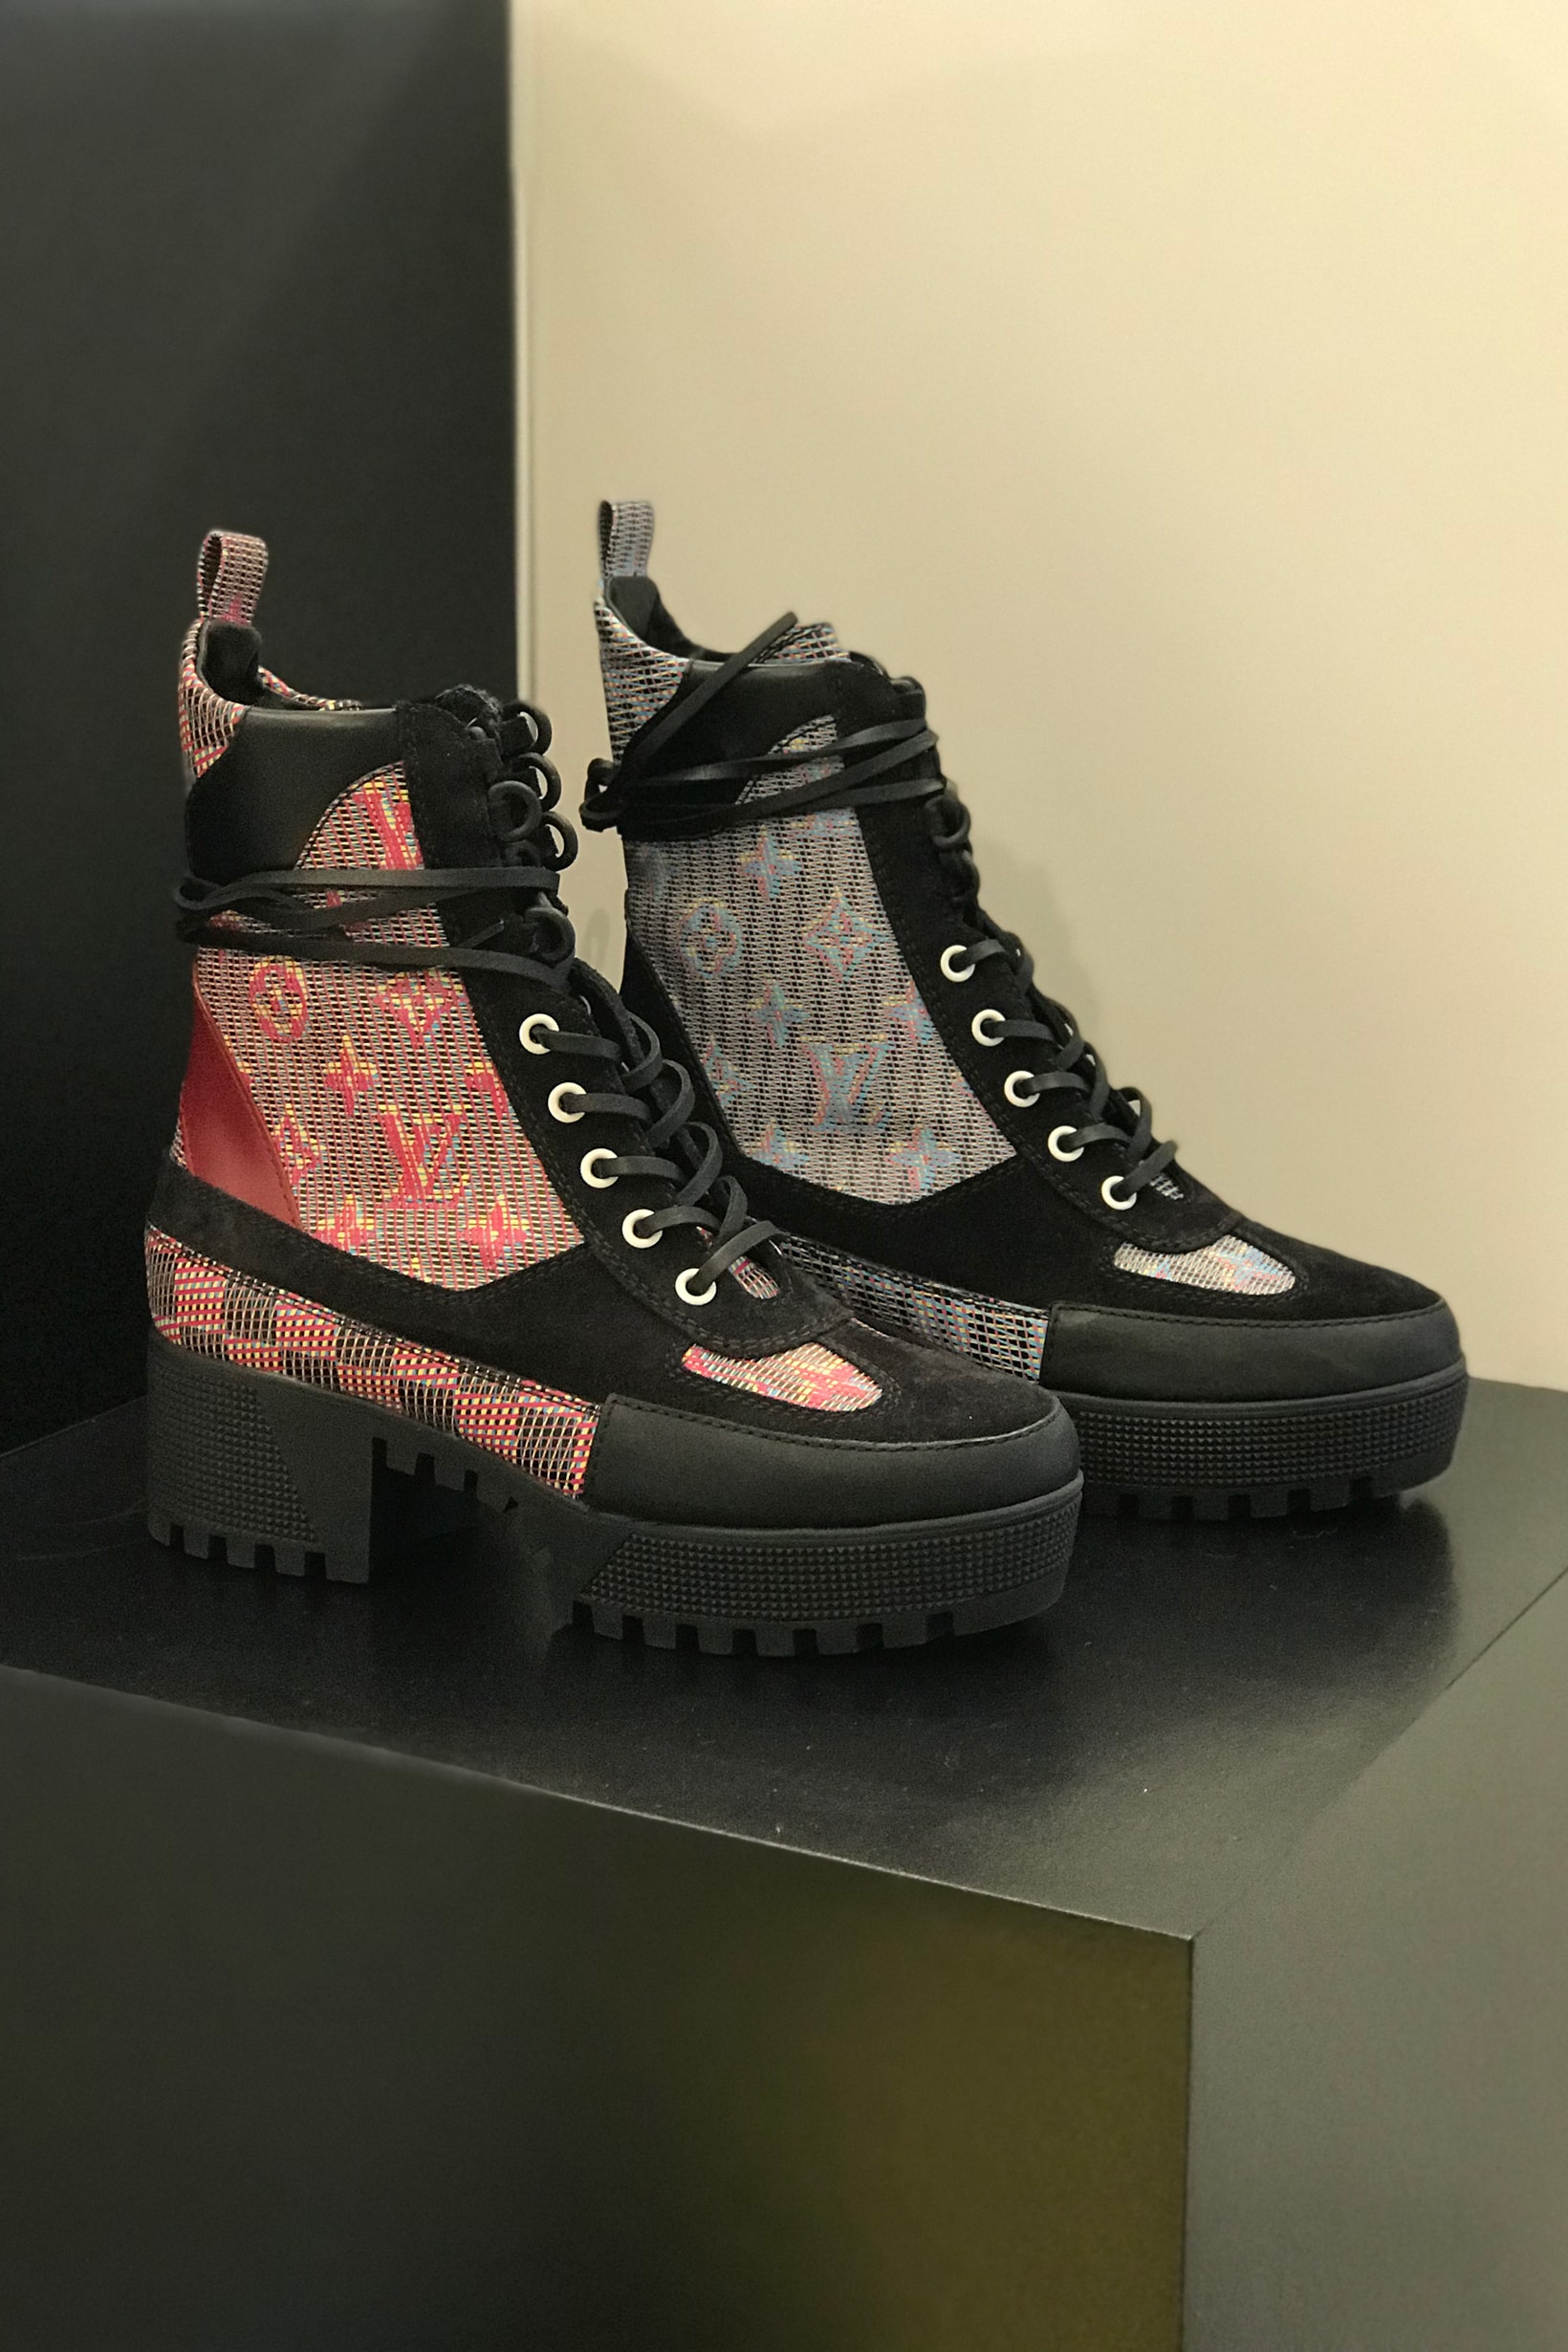 Find Out Where To Get The Shoes  Louis vuitton boots, Outfits, Desert boots  outfit